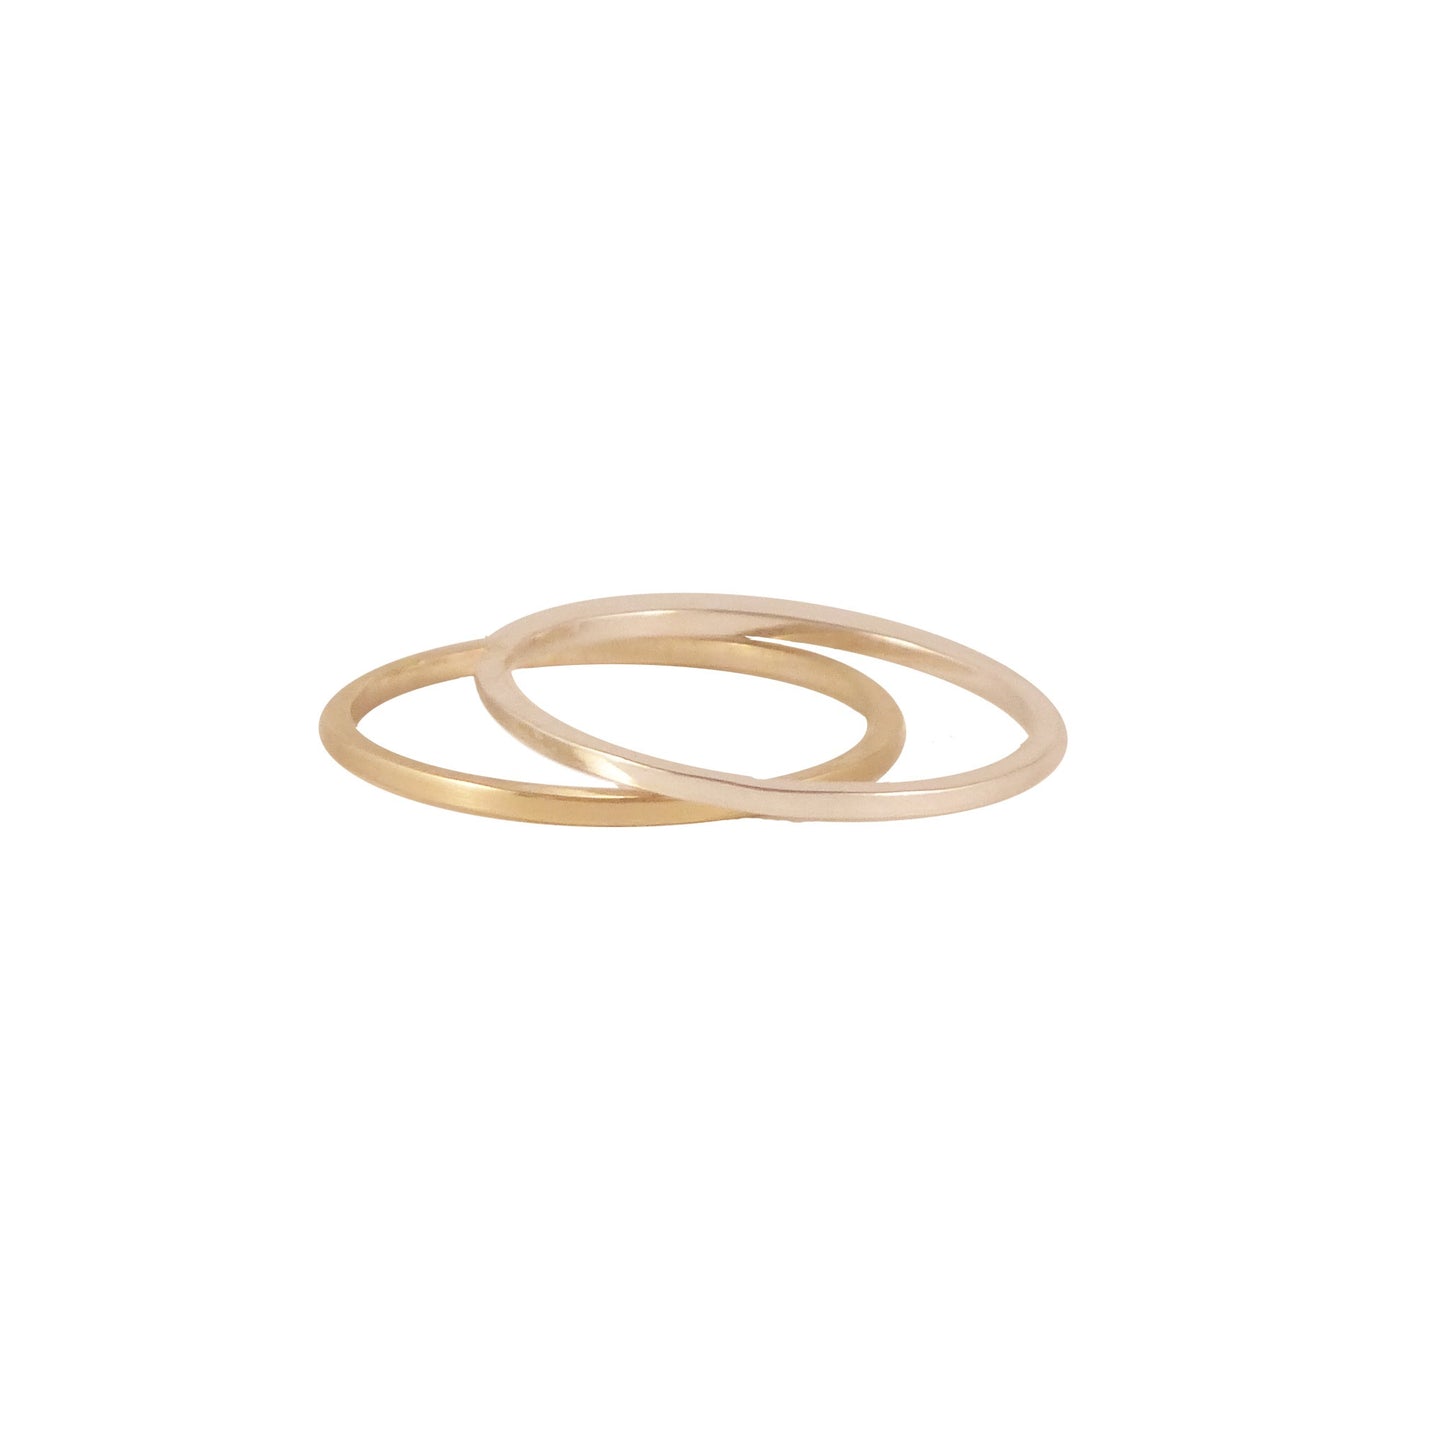 Skinny square band ring - 9ct yellow gold